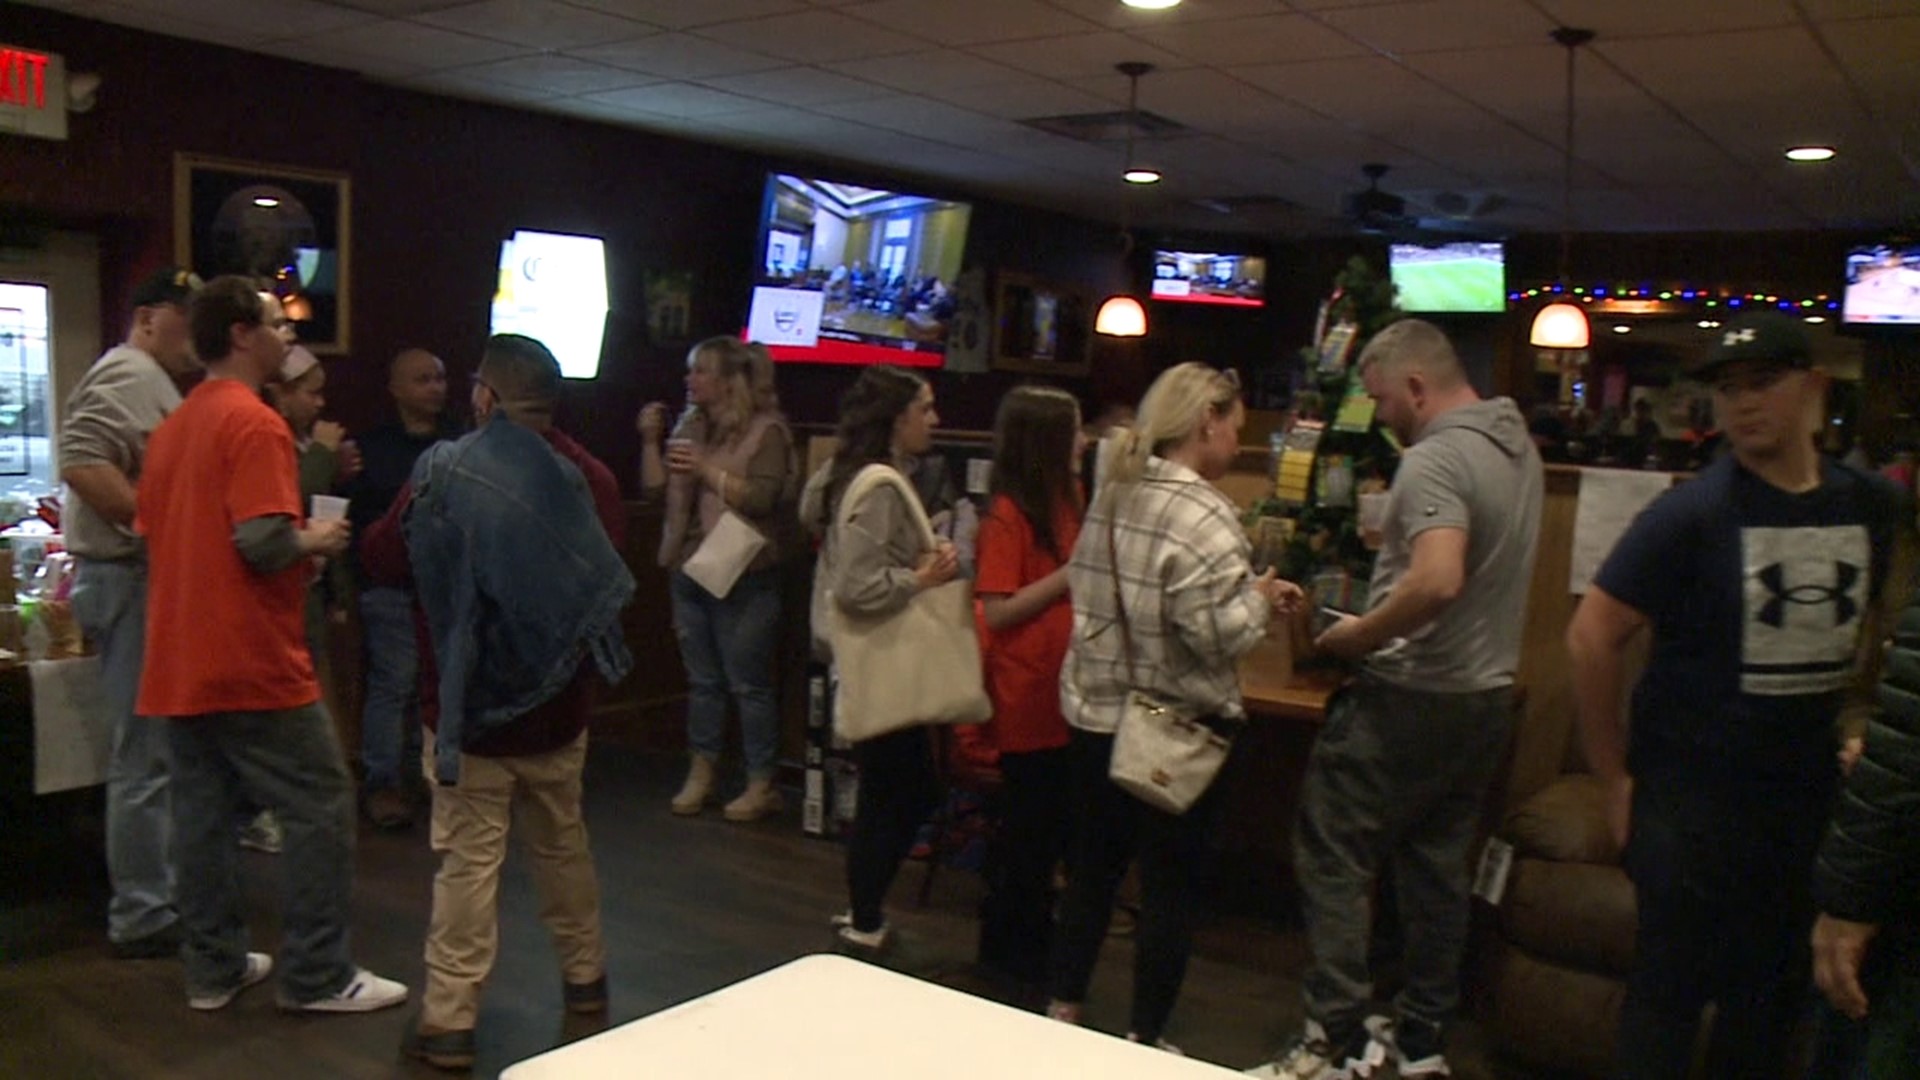 The fundraiser was held at Morgan'z Pub and Eatery along Green Ridge Street in the city Saturday.